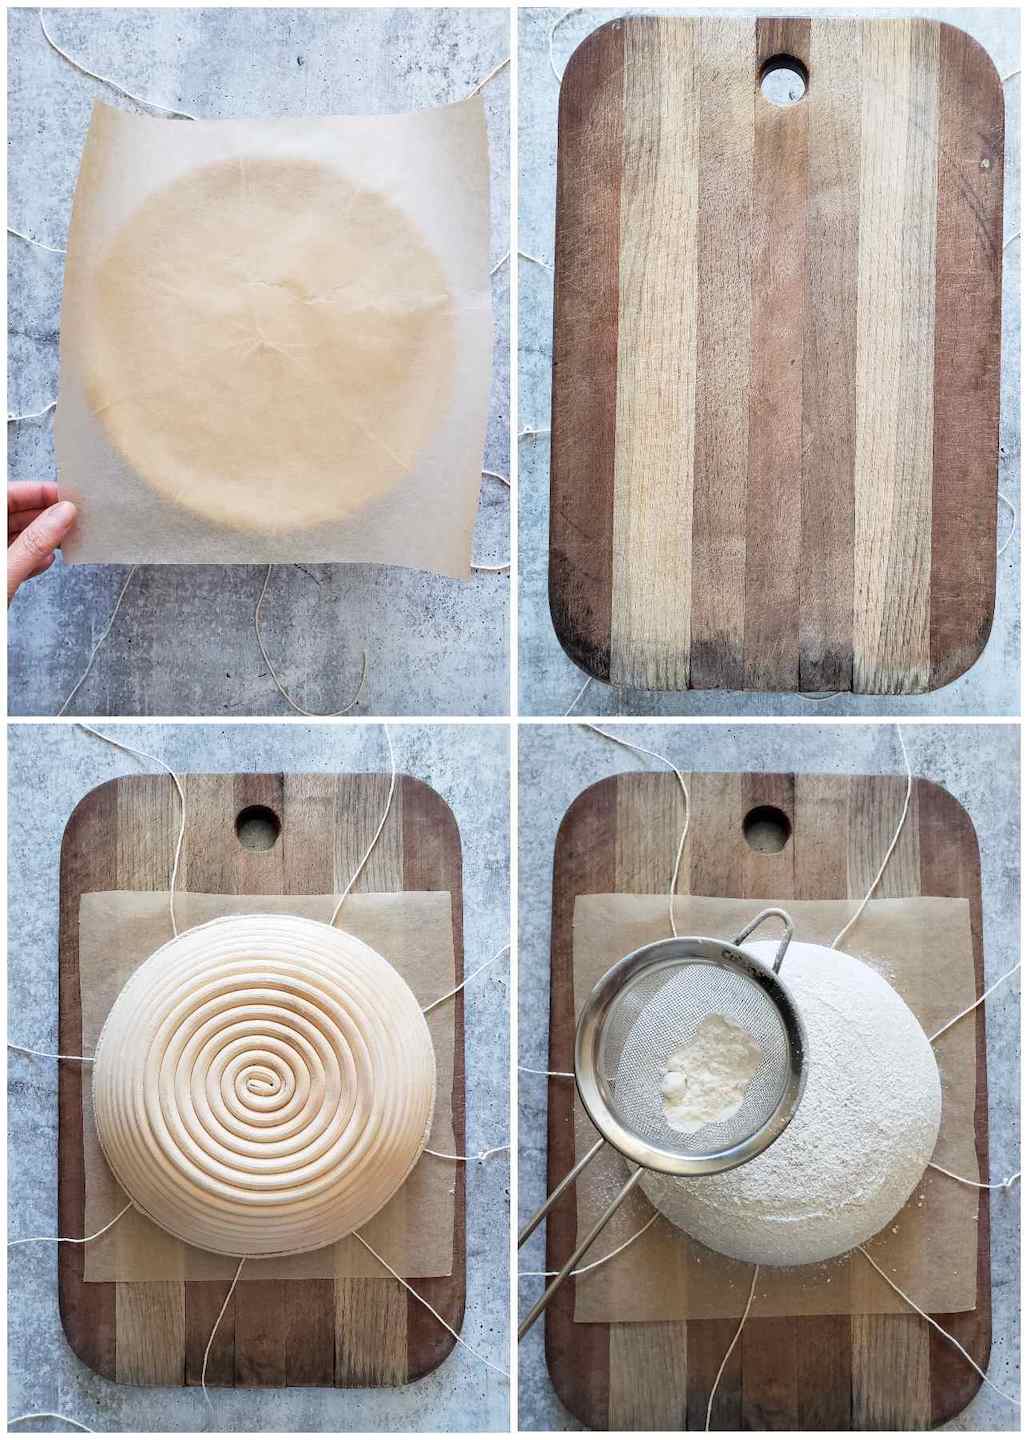 A four way image collage, the first image shows a piece of parchment paper on top of a banneton. The second image shows a cutting board that is now on top of the parchment and banneton. The third image shows the banneton now upside down sitting on top of the cutting board and parchment paper. Eight pieces of string are emanating from the bottom of the loaf like rays from the sun. The fourth image shows the banneton removed, leaving behind a fresh loaf of dough. A small strainer is being used to sift flour over the top of the dough. 